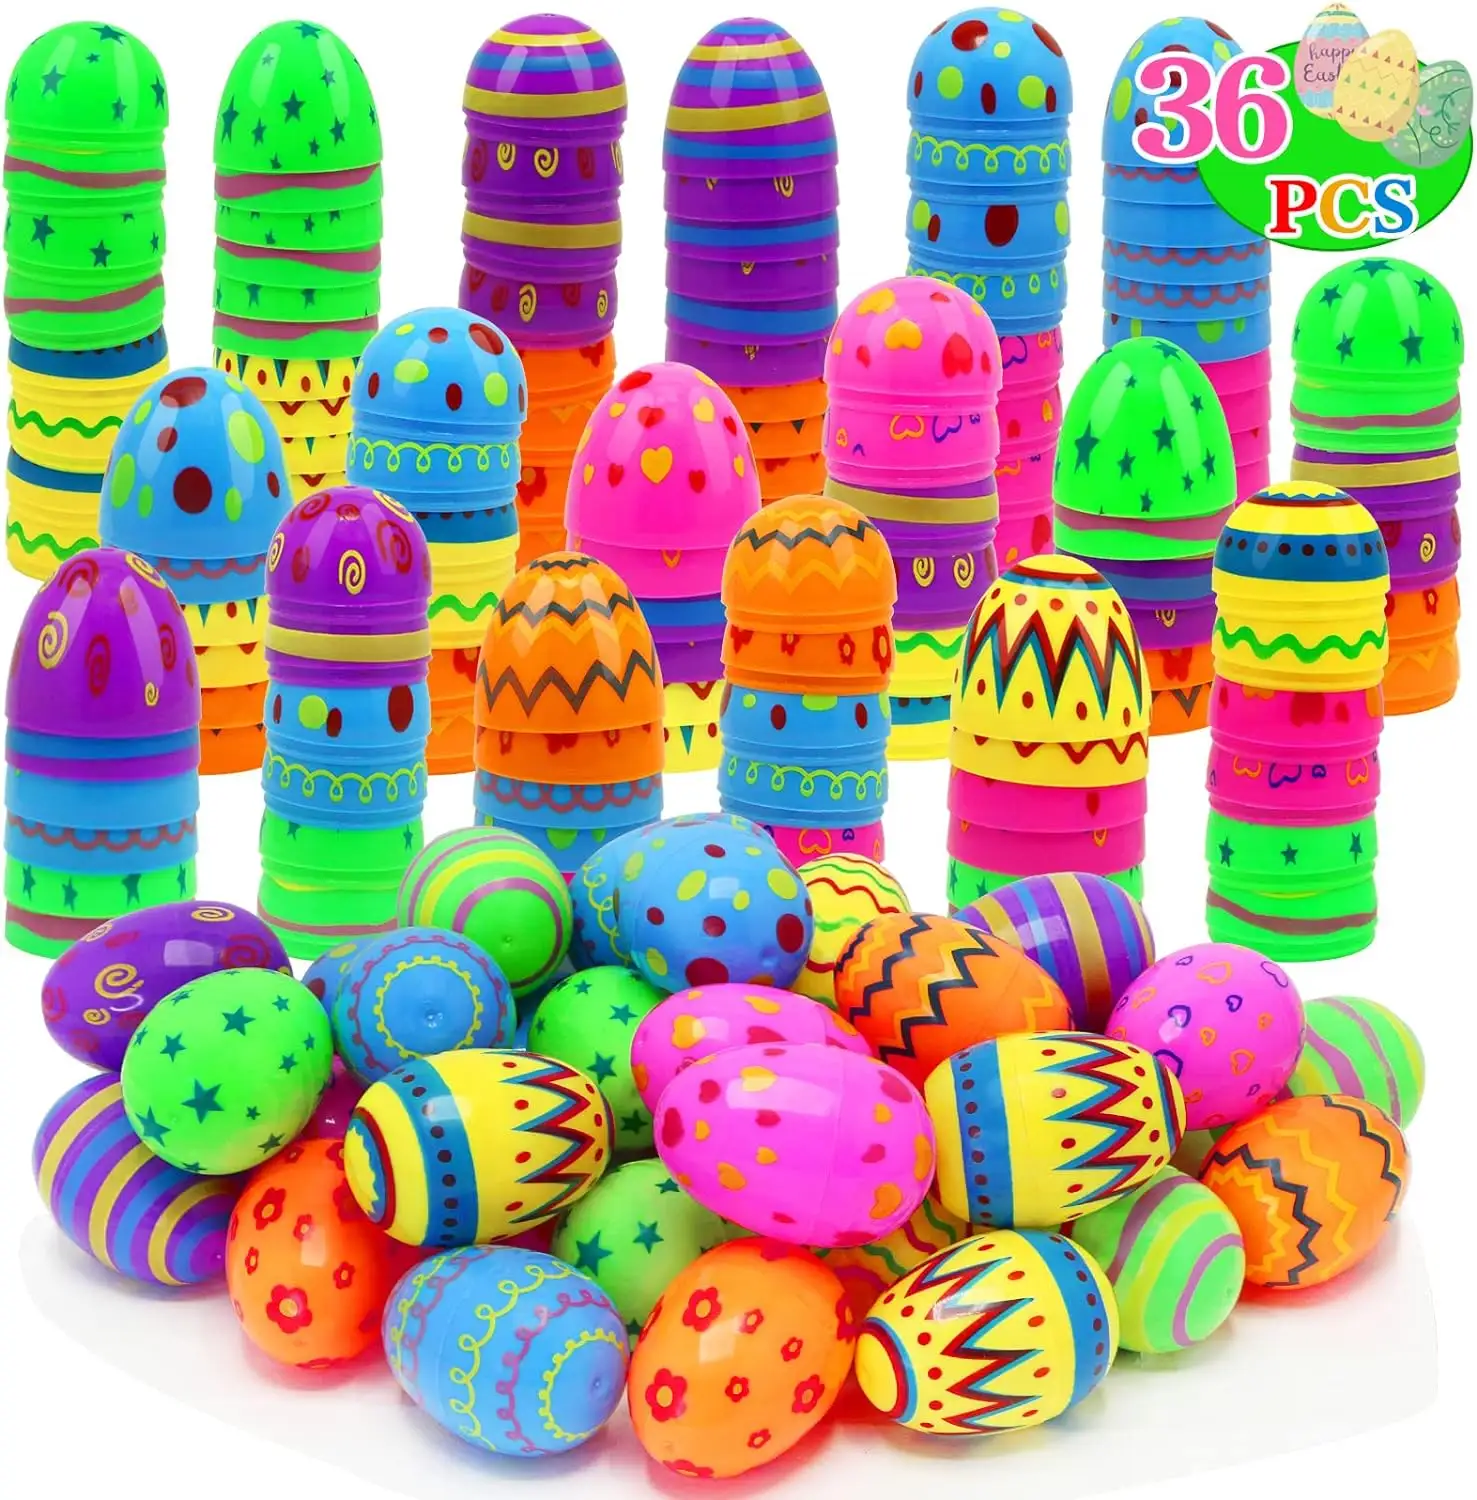 Colorful Easter Festival Holiday Day Party Decoration Supplies Child Kids Toys Empty Small Easter Eggs Painted Eggshell Sets